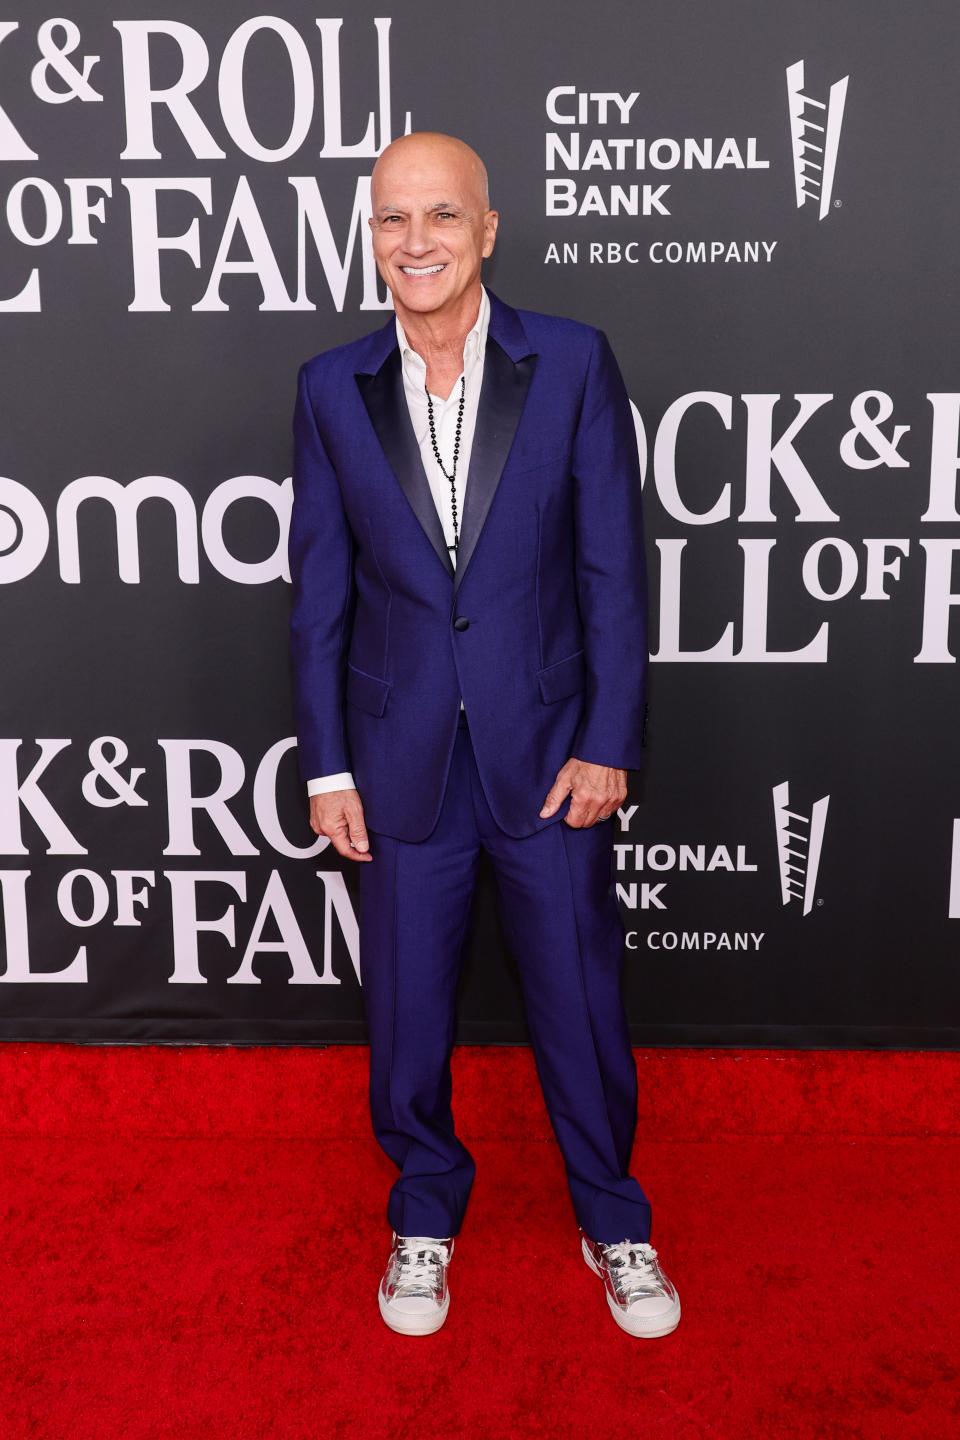 Jimmy Iovine attends the 37th Annual Rock & Roll Hall of Fame Induction Ceremony at Microsoft Theater on Nov. 5, 2022 in Los Angeles.